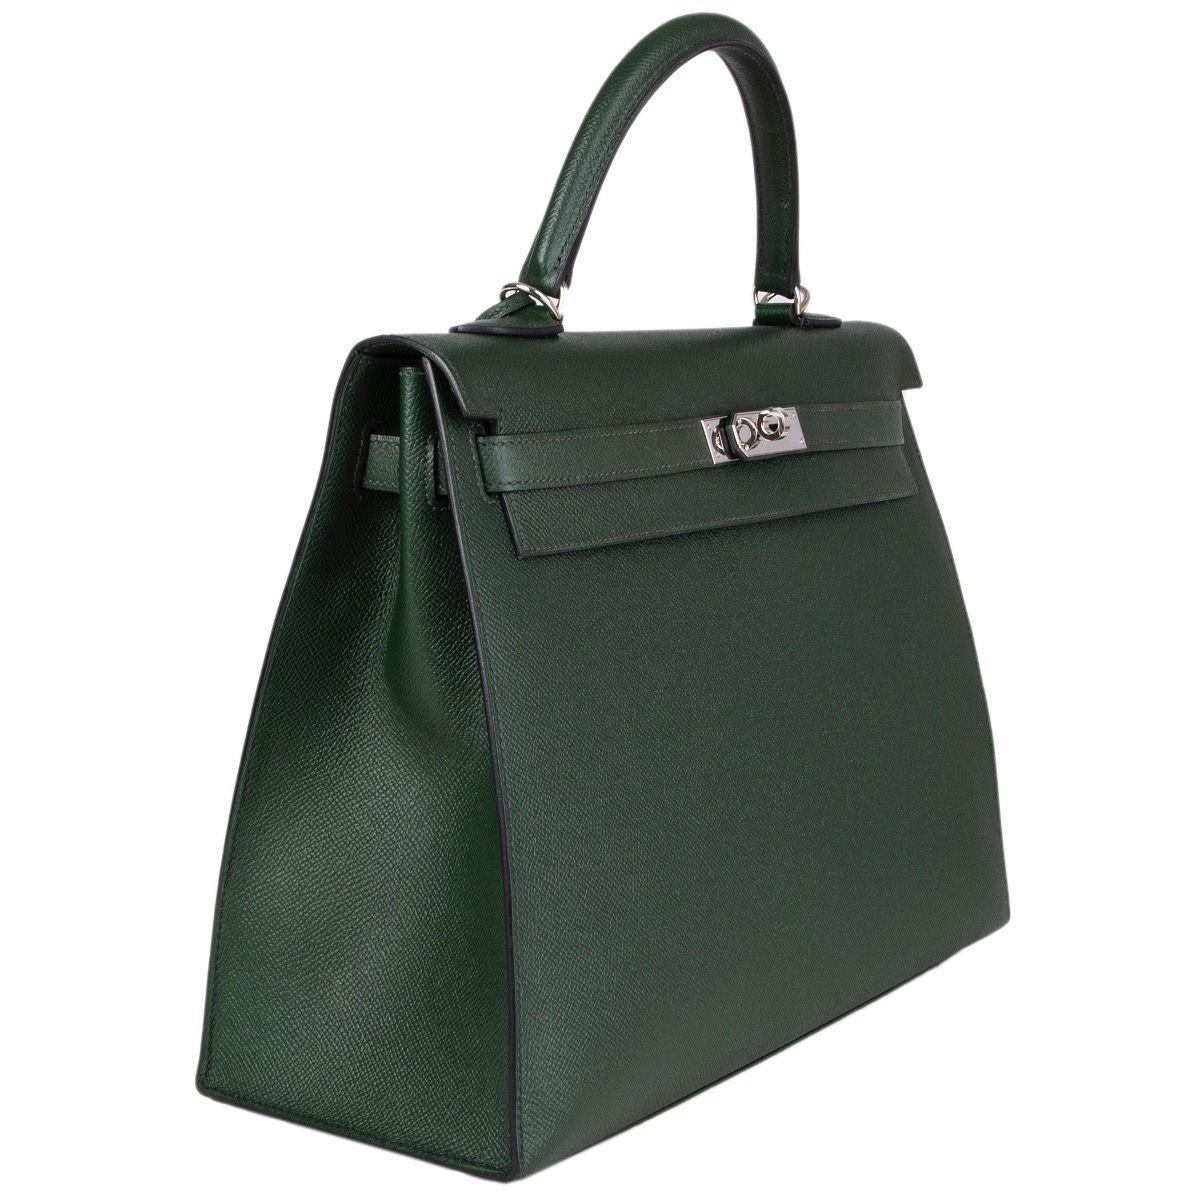 Hermès 'Kelly II 35 Sellier' in Vert Anglais Veau Epsom leather with palladium hardware. Removable shoulder strap. Closes with a turn-lock and straps on the front. Lined in Vert Anglais Chevre (goat skin) with two open pockets against the front and